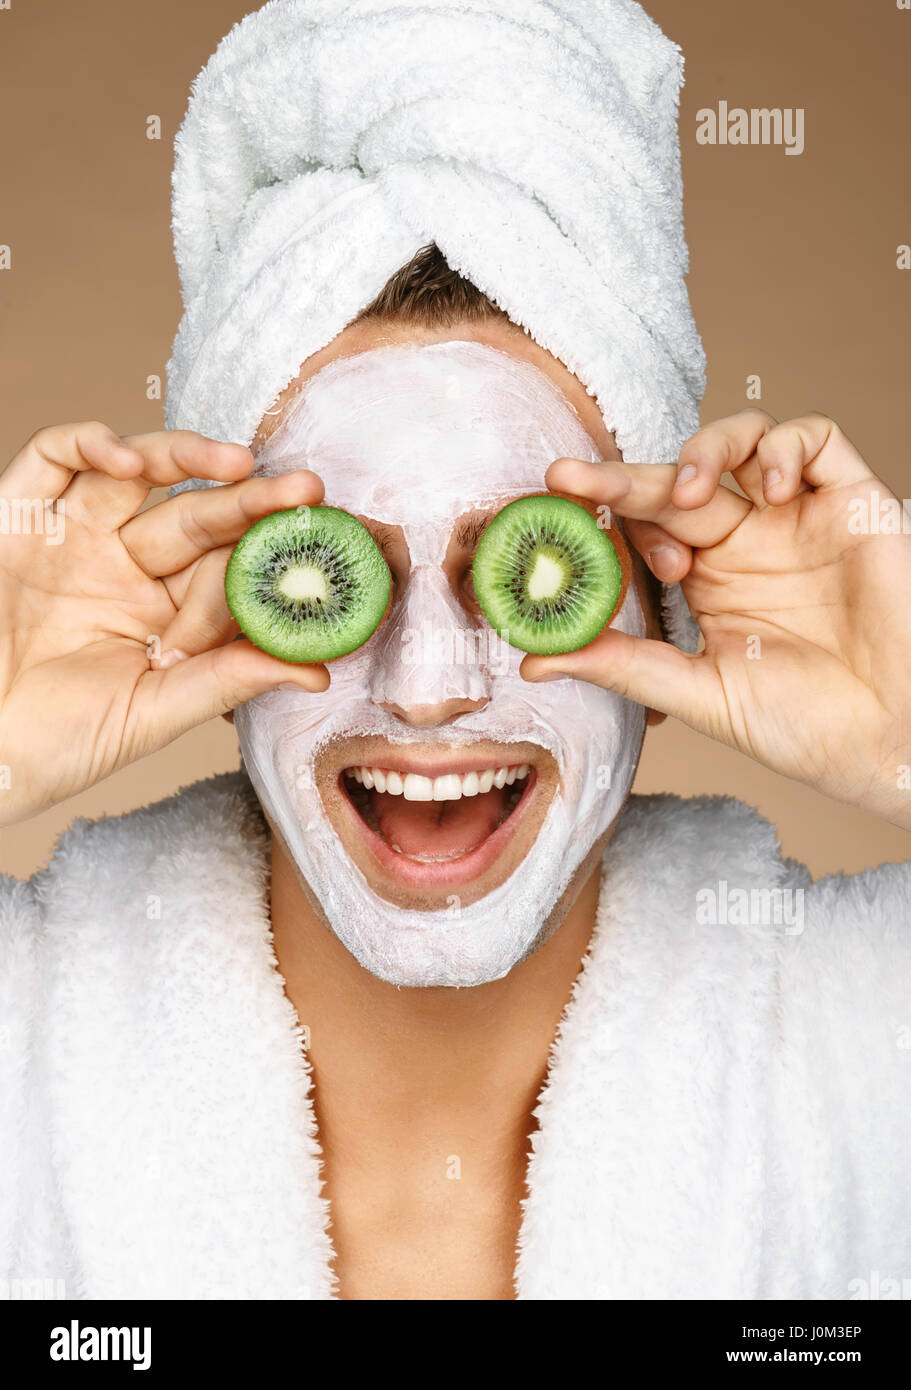 Funny young man with facial mask and pieces of kiwis on eyes. Photo of well groomed man receiving spa treatments. Beauty & Skin care concept Stock Photo